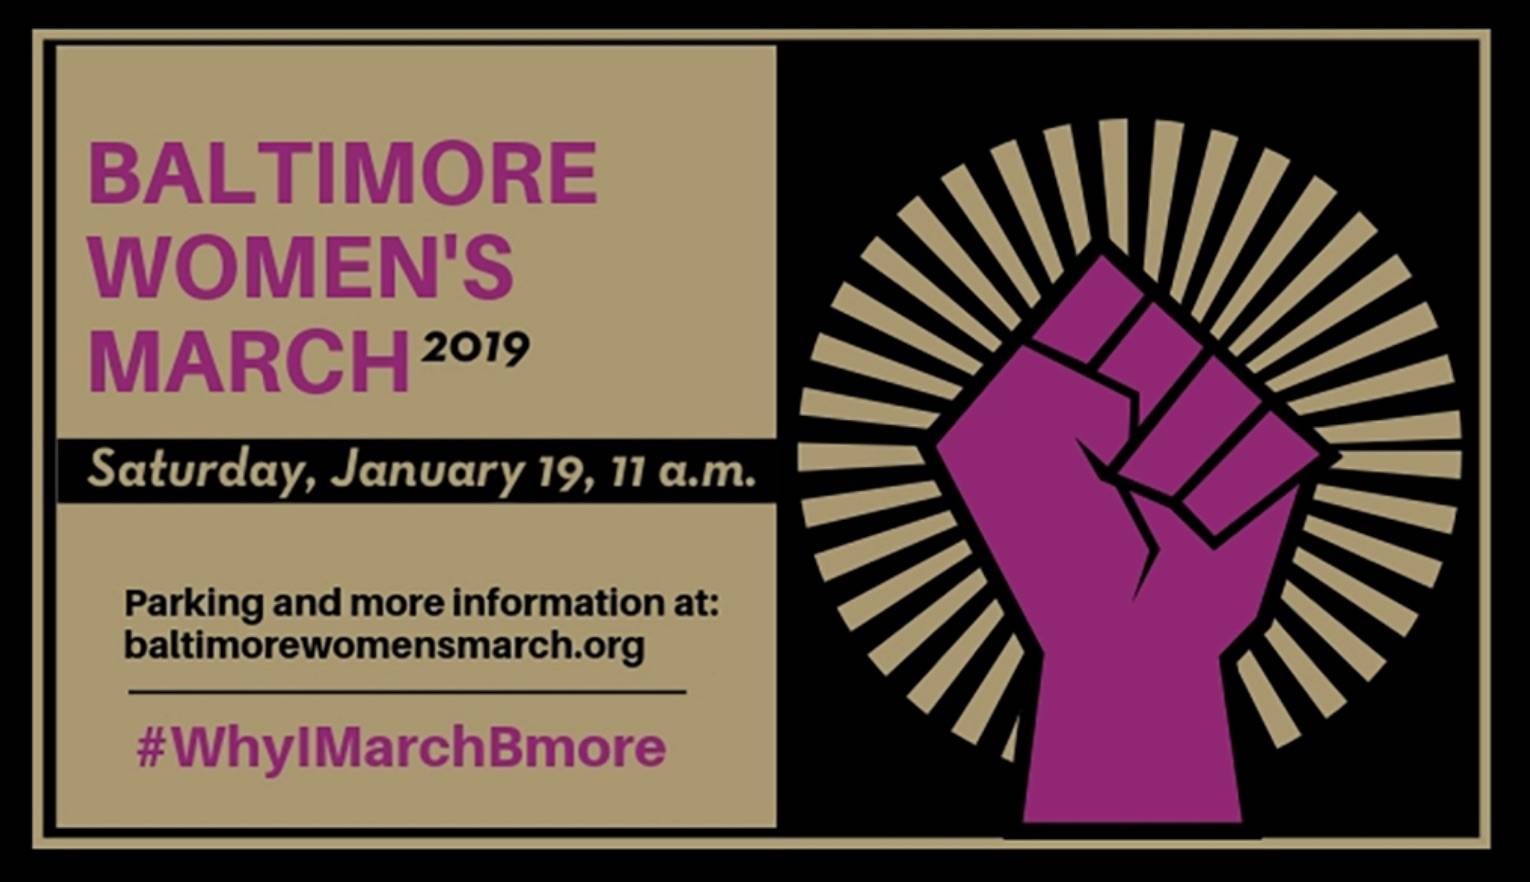 The banner for the baltimore women's march.